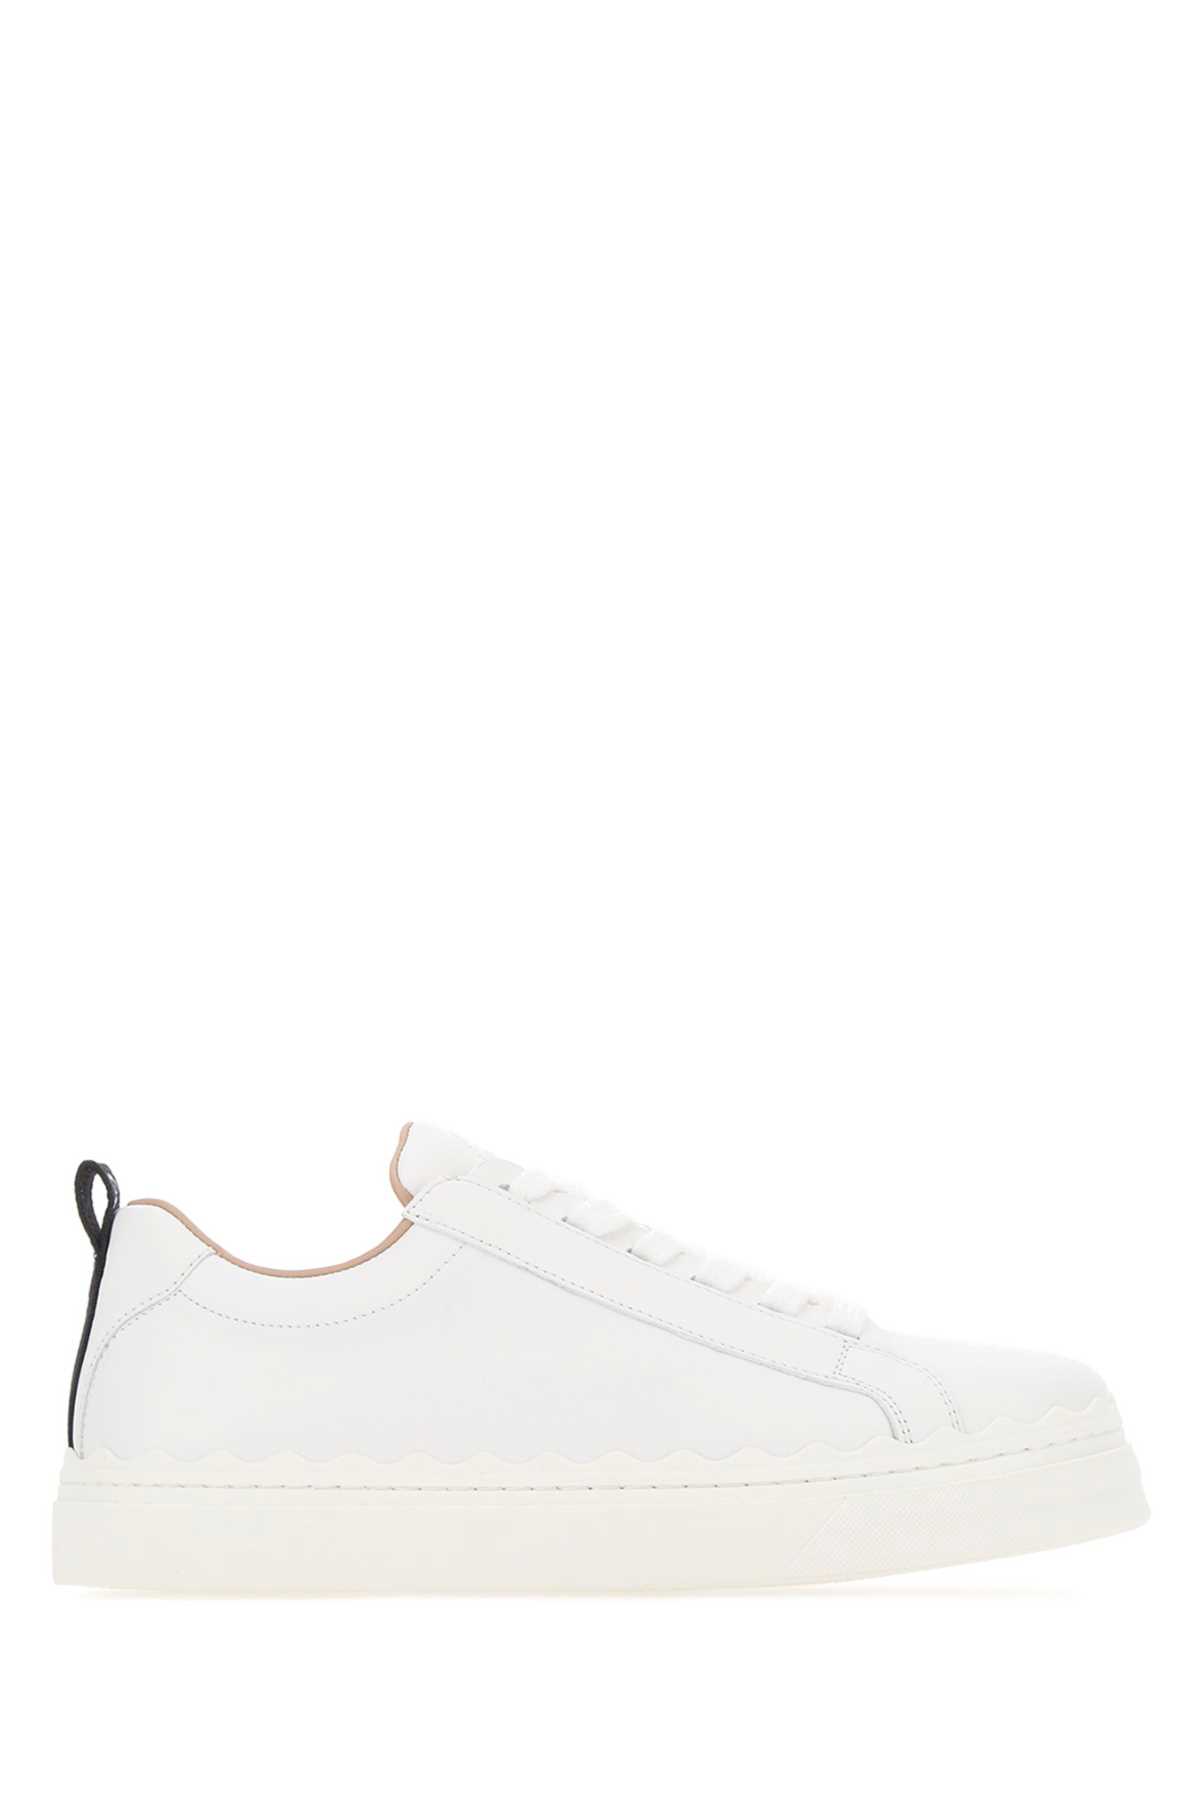 Chloé White Leather Lauren Sneakers